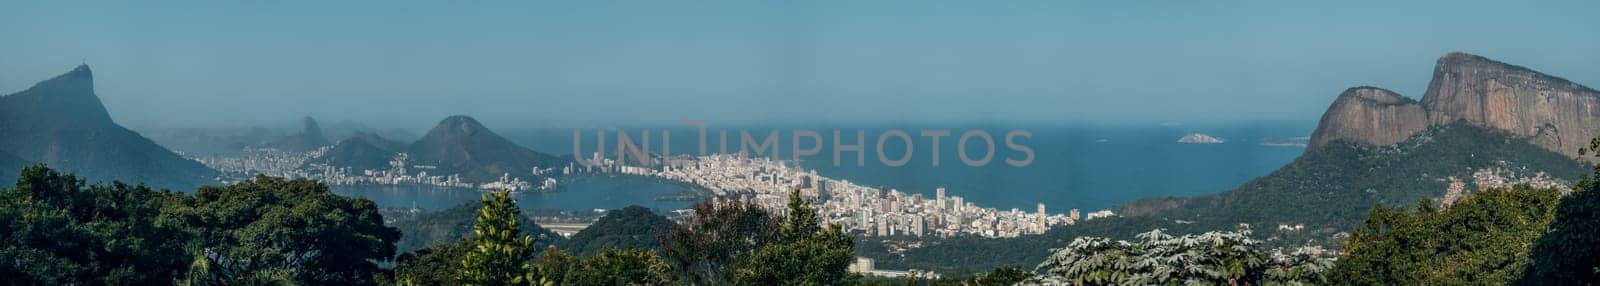 Panoramic View of Rio de Janeiro from a High Vantage Point by FerradalFCG